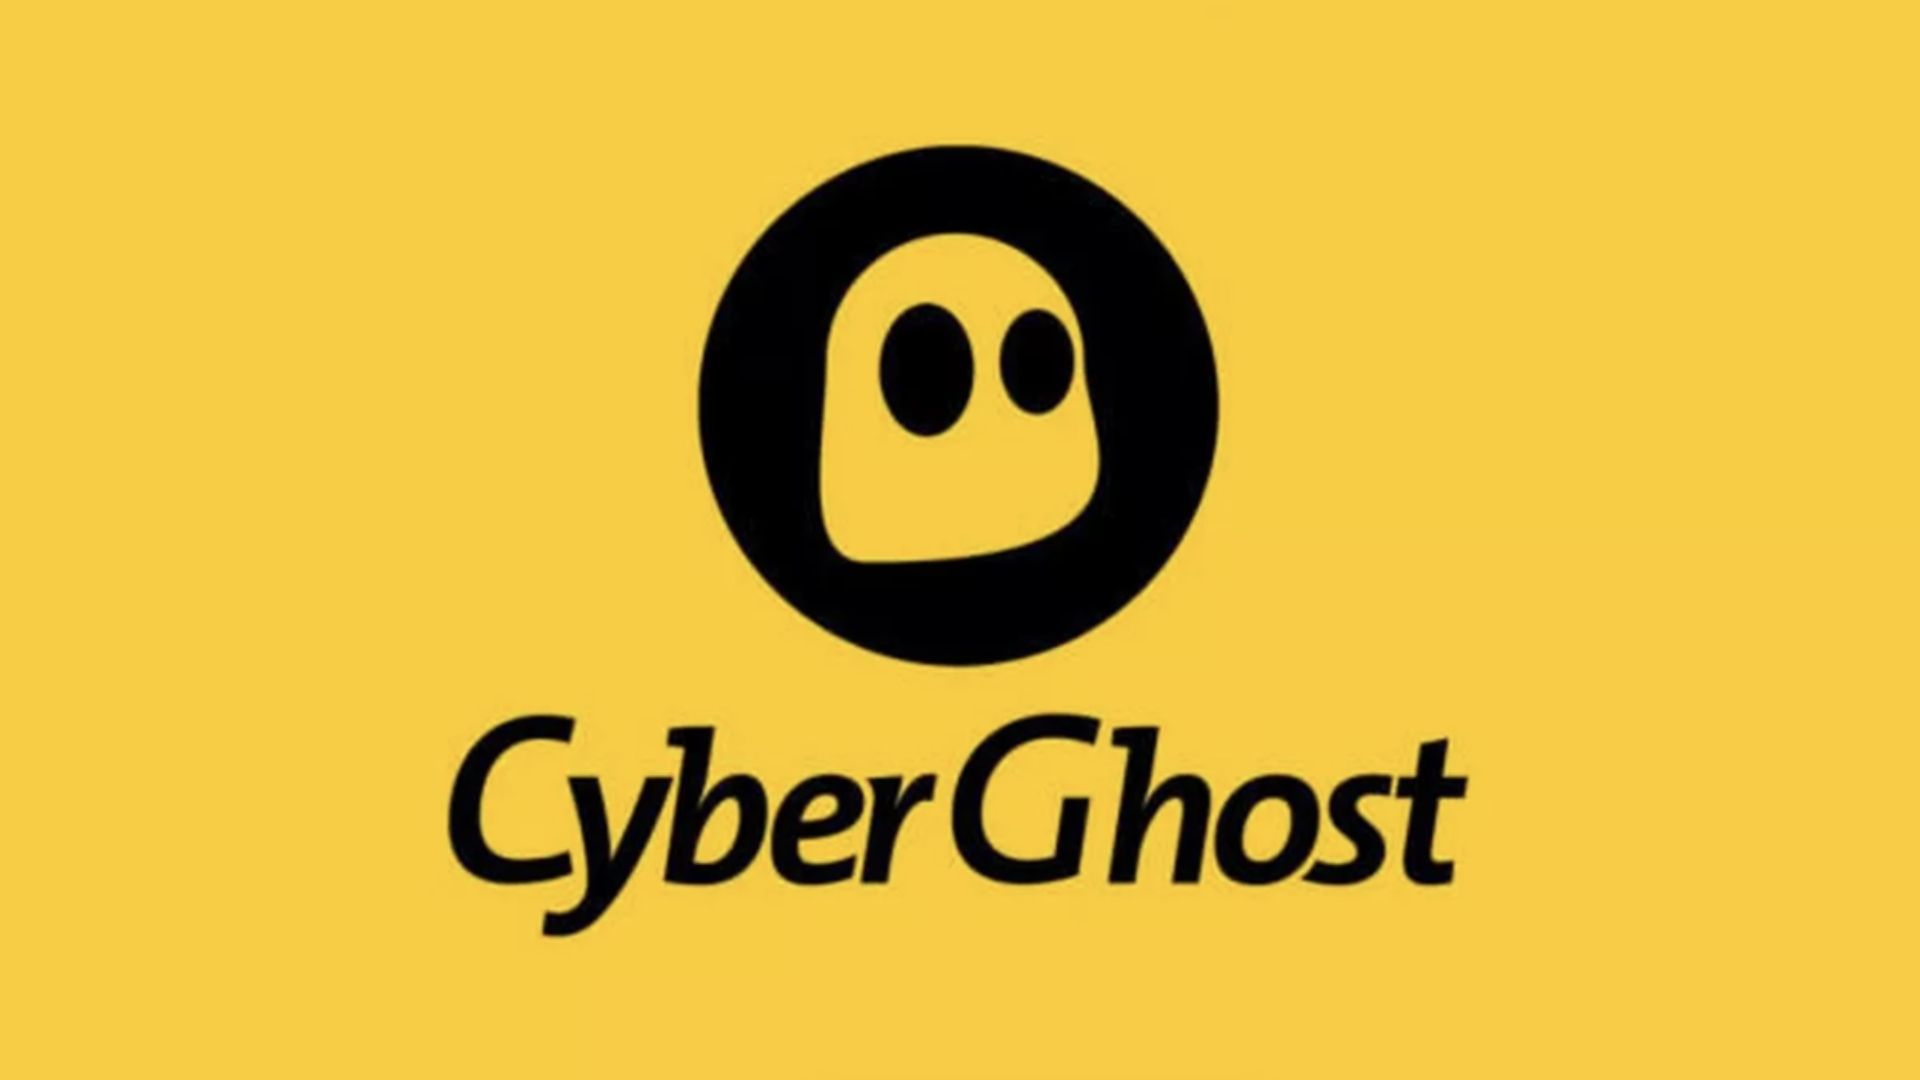 Best Canadian VPN - CyberGhost. Image shows the company logo.